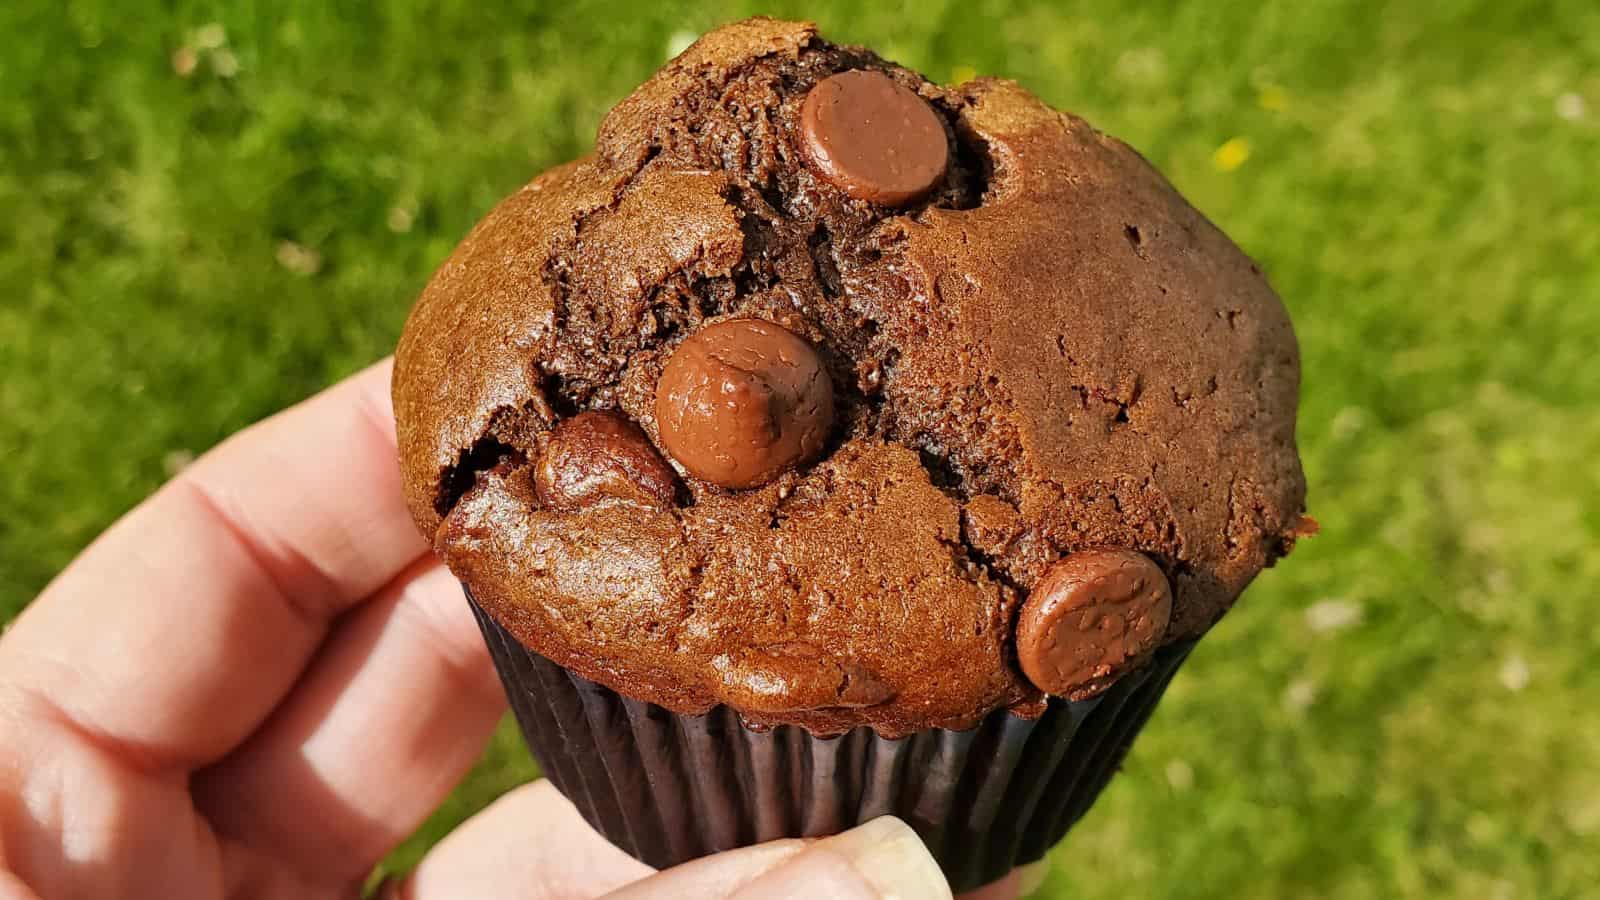 Hand holding a double chocolate muffin.